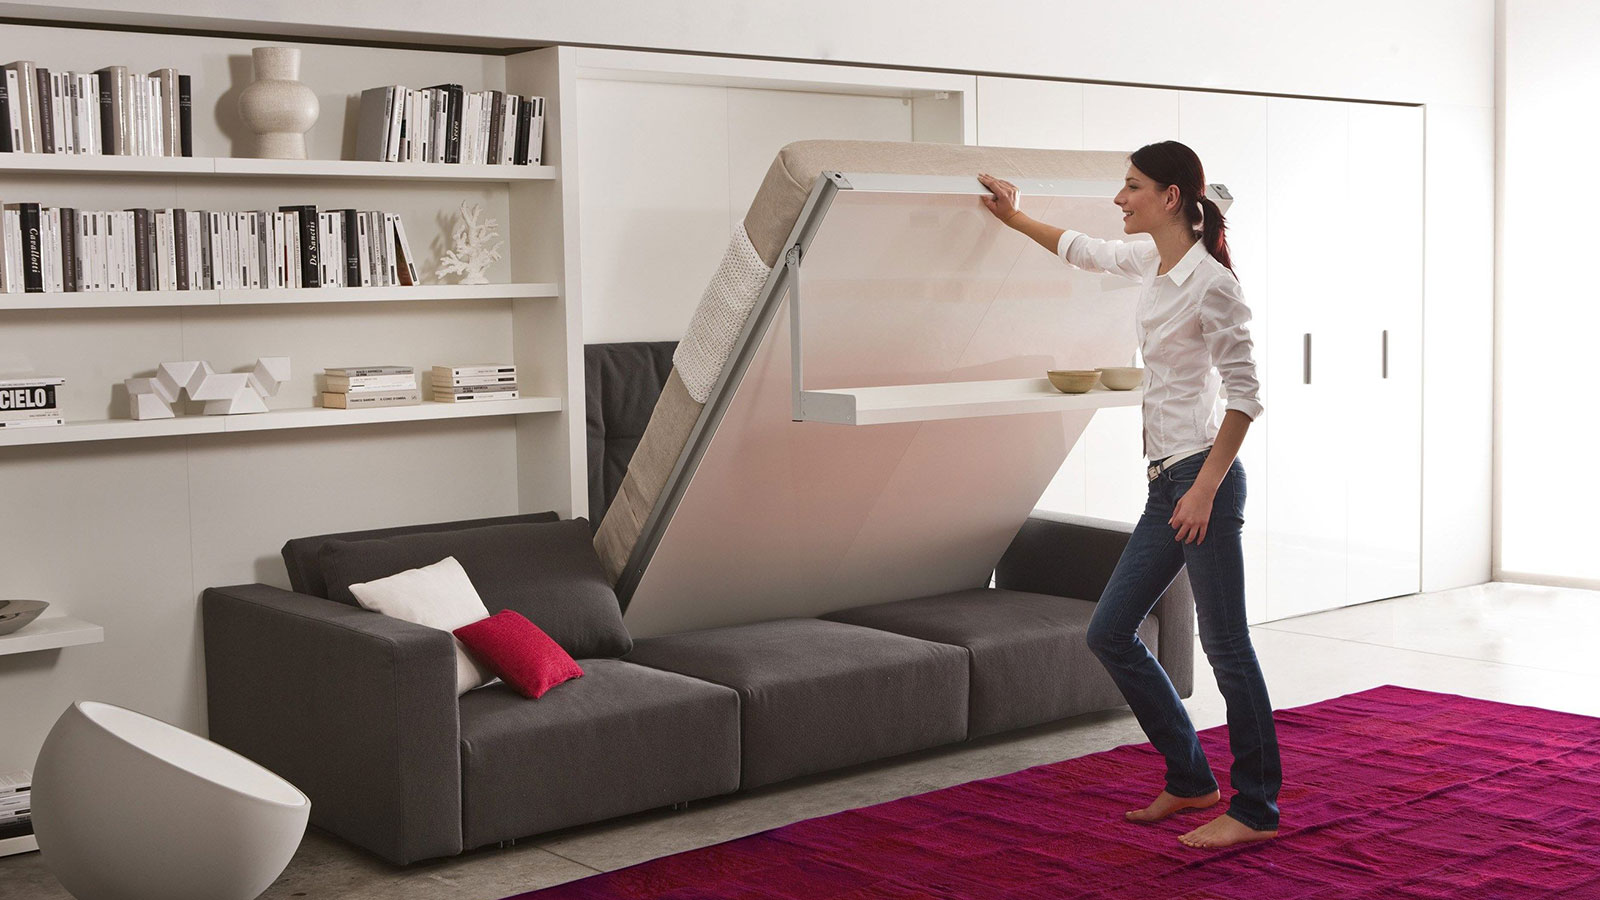 These 10 Modern Murphy Beds Will Help You Maximize Space In Your Small Home 10 Stunning Homes,Tom Collins Glass